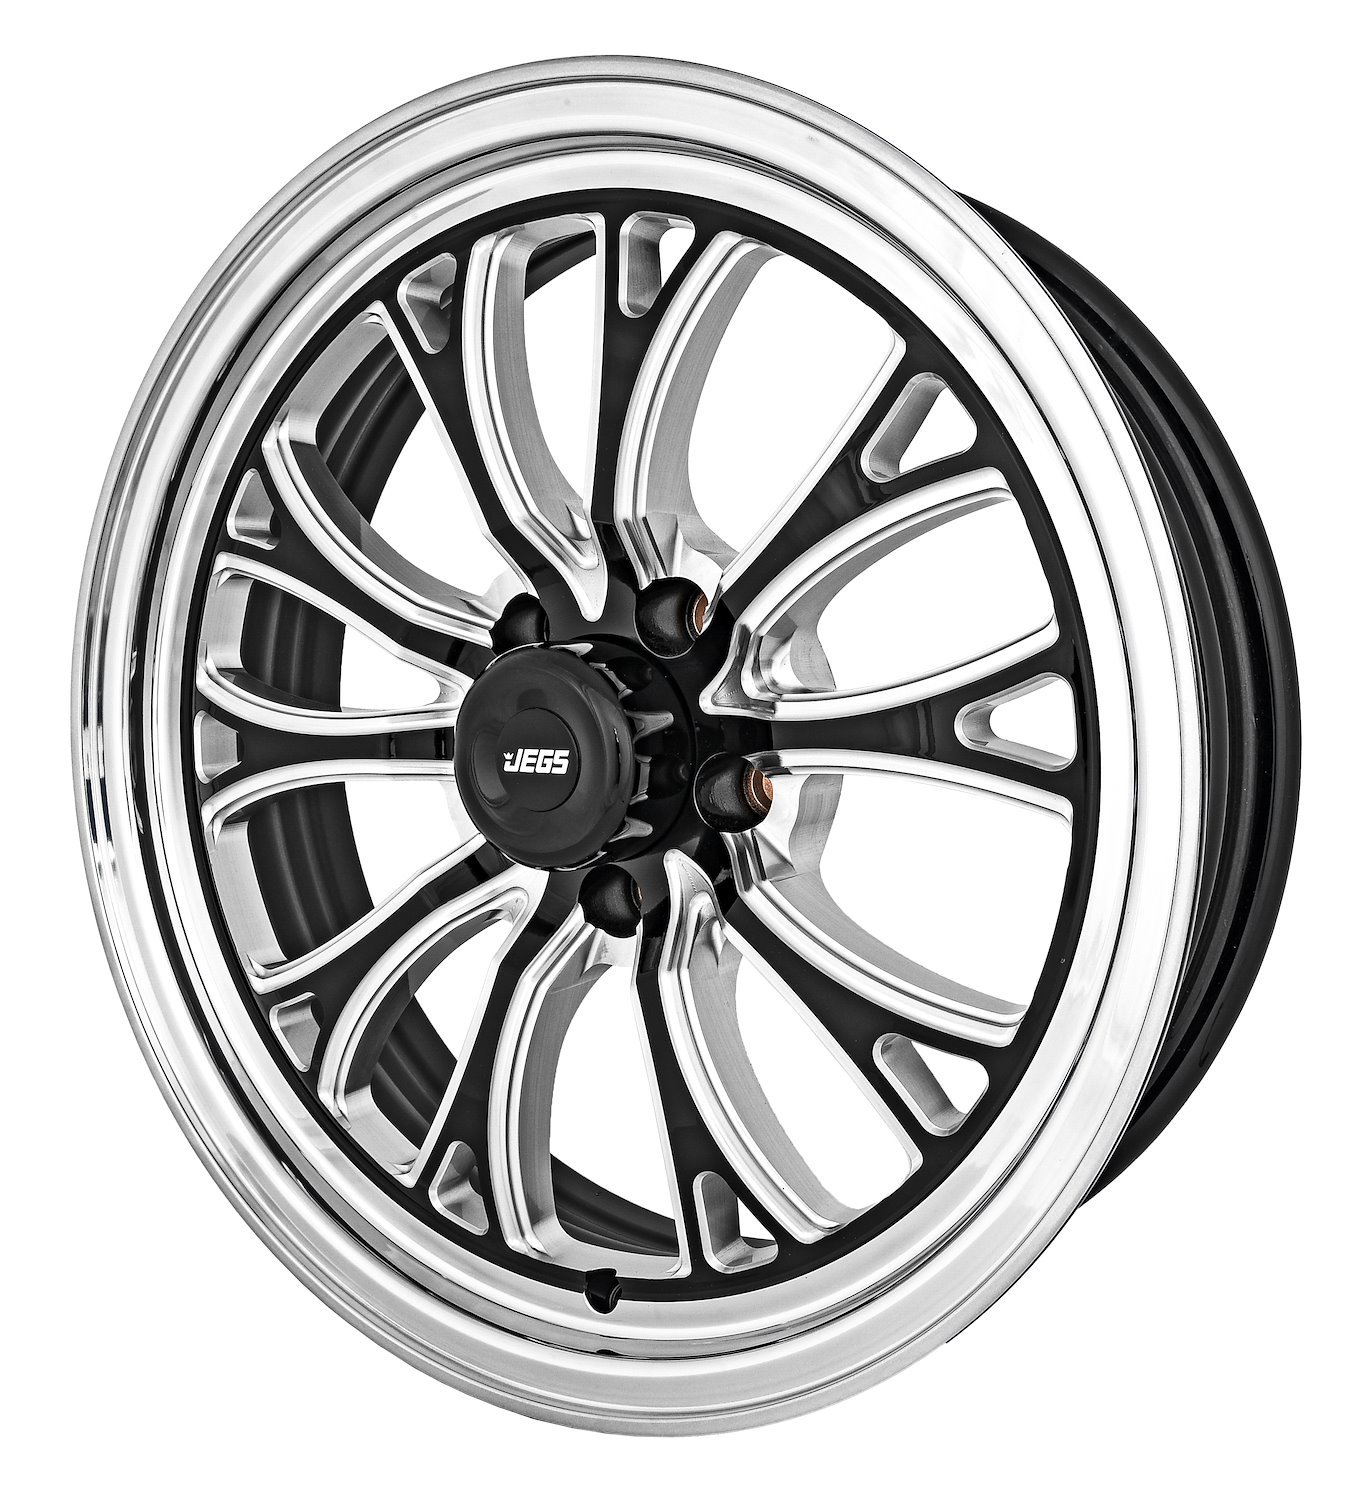 JEGS 555-681390: SSR Spike Wheel | Size: 17" x 4.50" | Bolt Pattern: 5 x  5.00" | Back Spacing: 1.75" | Offset: -24 mm | Center Bore: 3.27" | Load  Rating: 1900 lbs. | Finish: Polished Outer Lip with Black Milled Spokes |  Compare to 555-681443 - JEGS